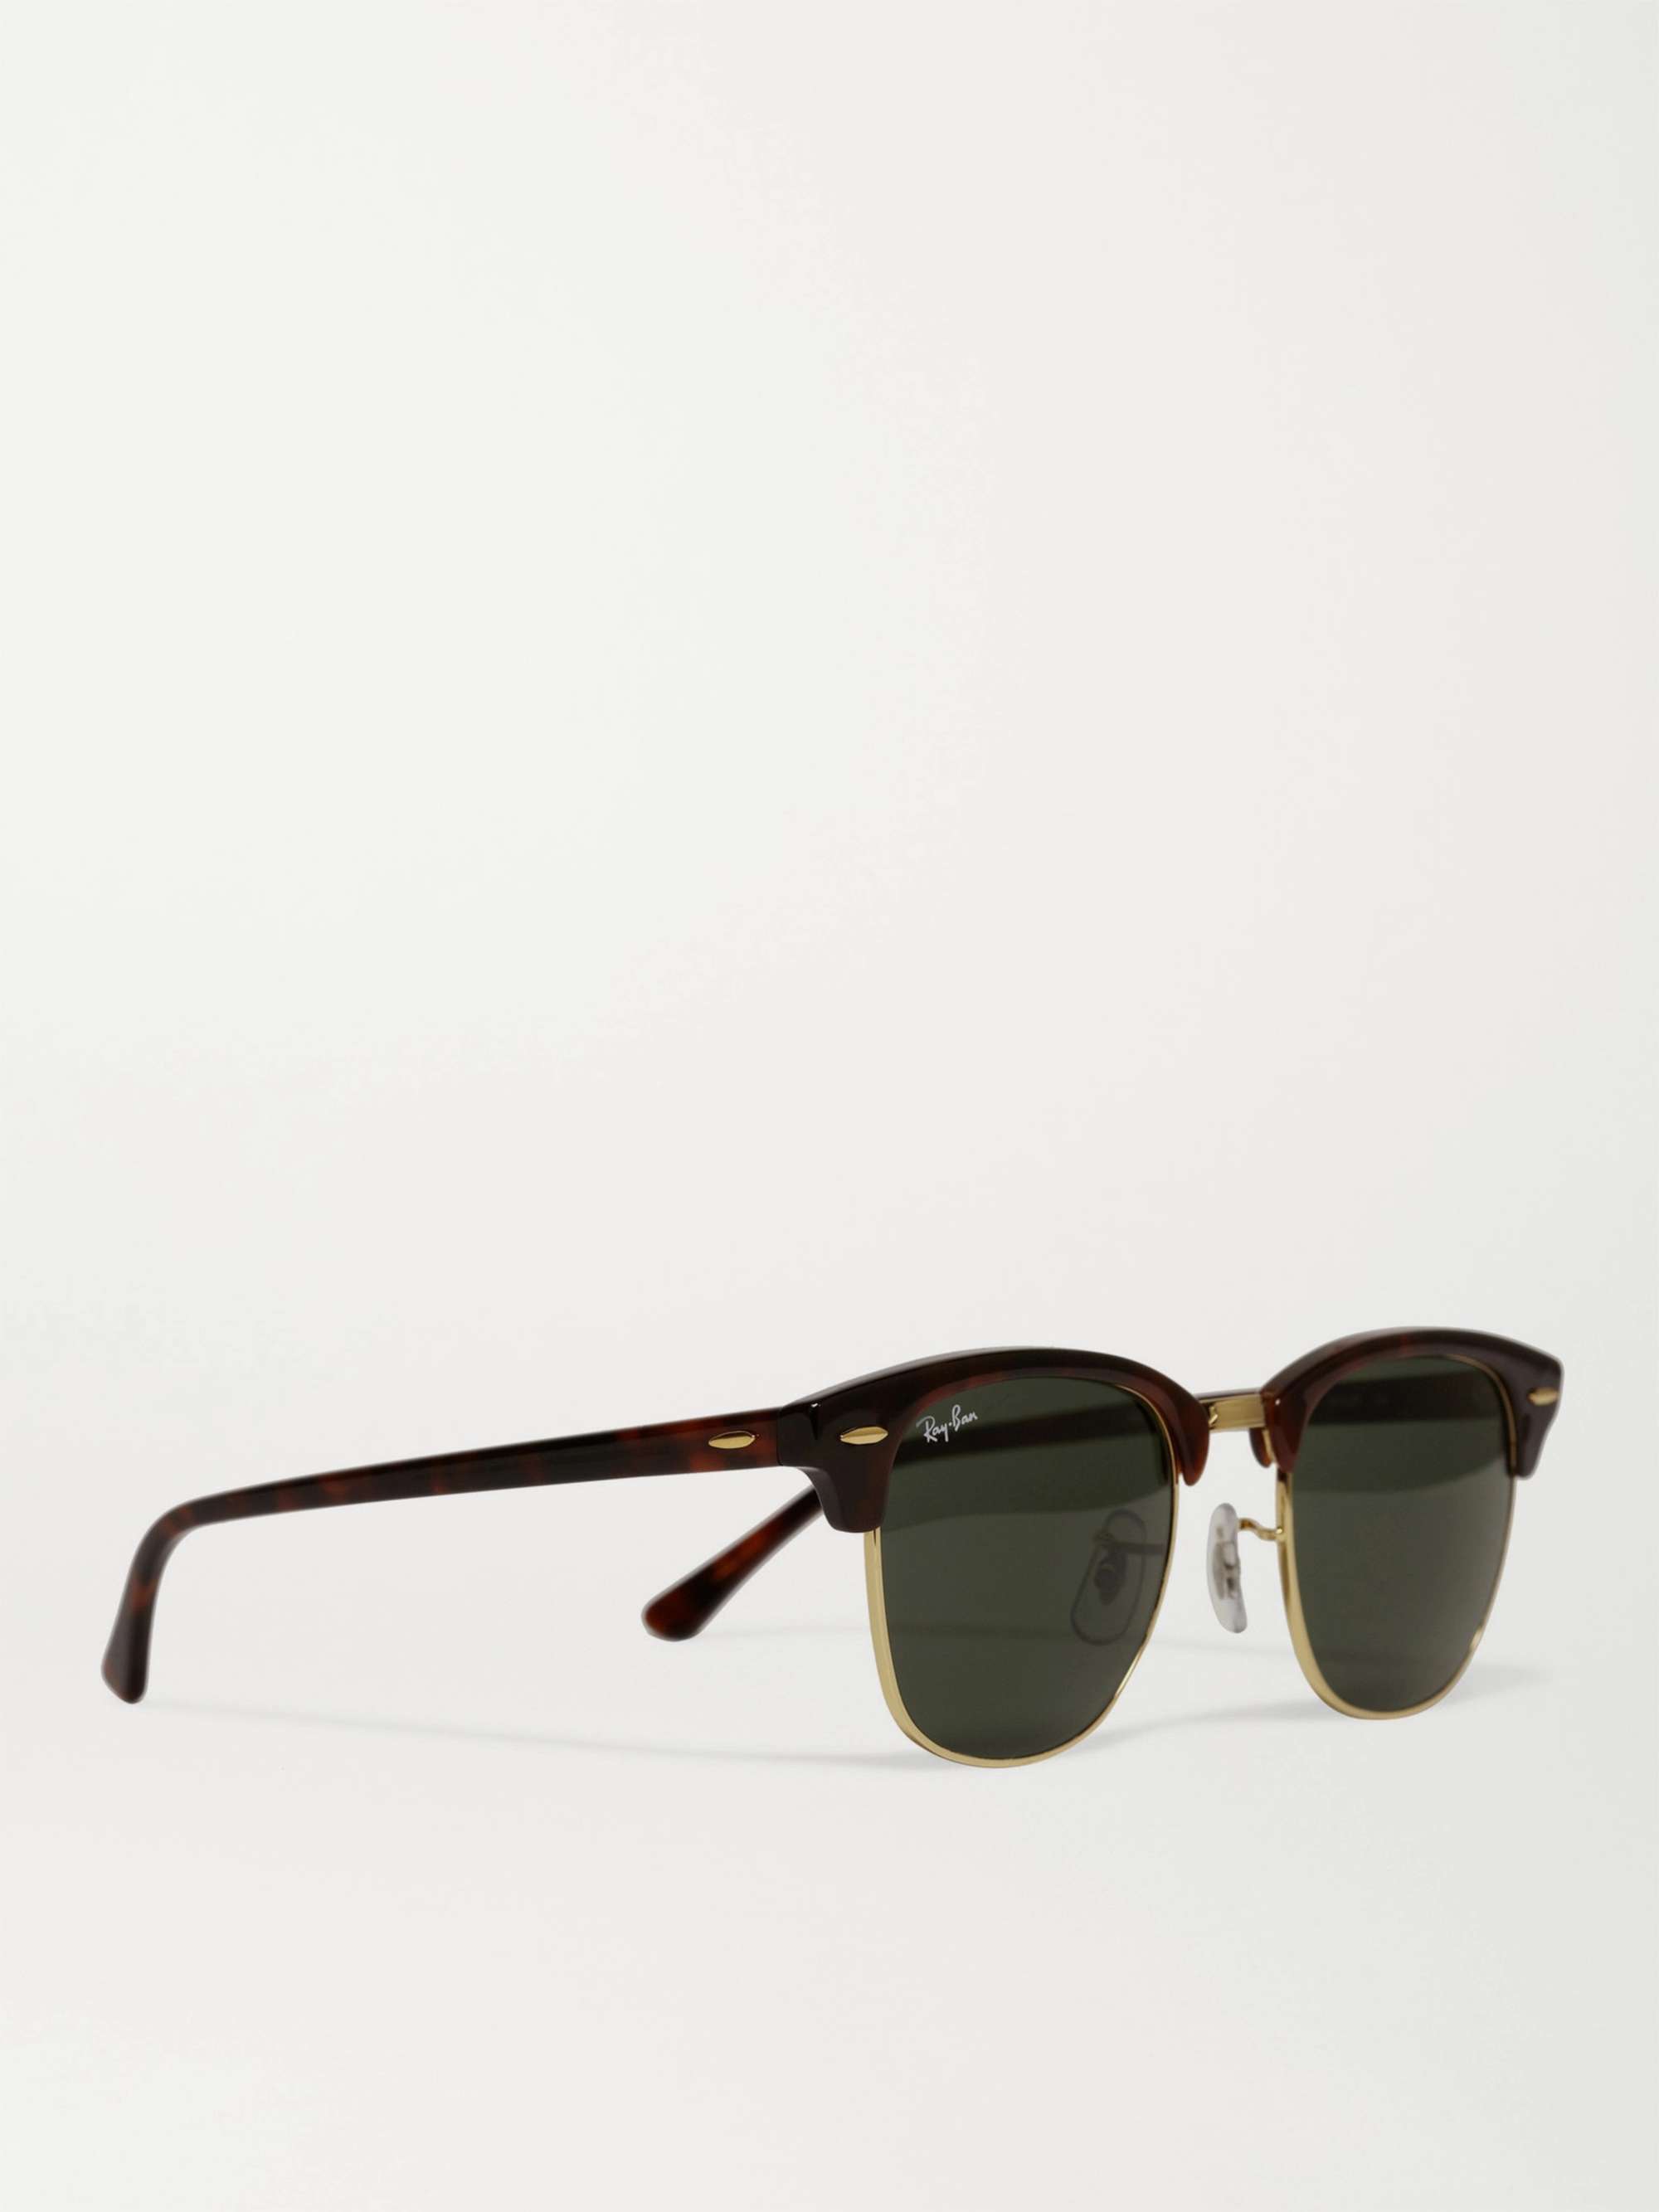 RAY-BAN Clubmaster Acetate and Gold-Tone Sunglasses